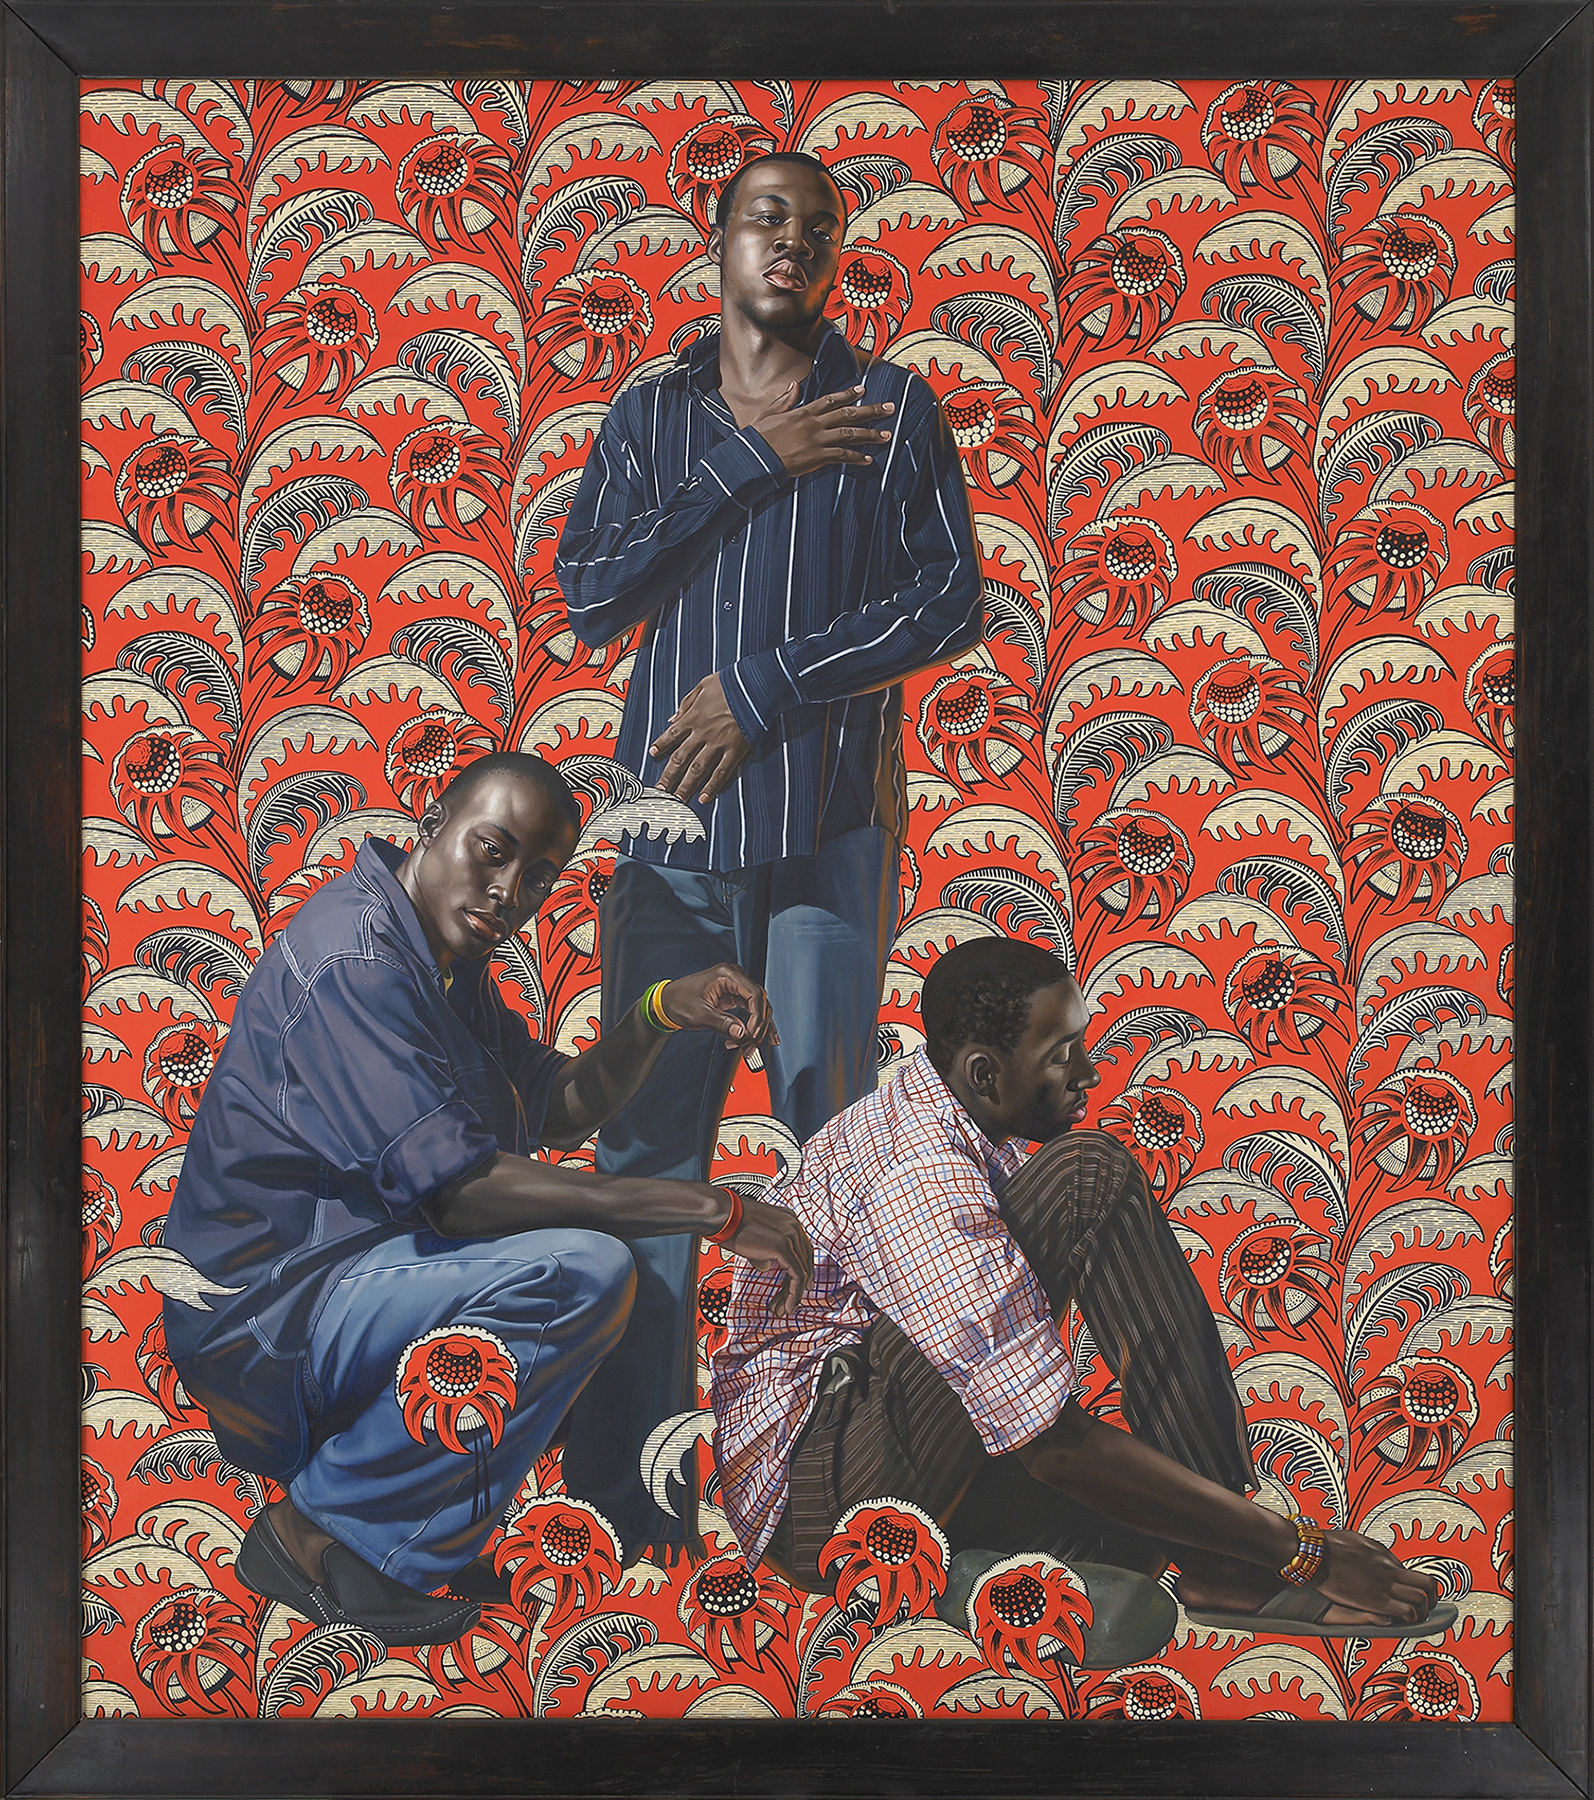 Kehinde Wiley | The World Stage: Lagos & Dakar | Hunger, 2008 Oil on Canvas. | 8